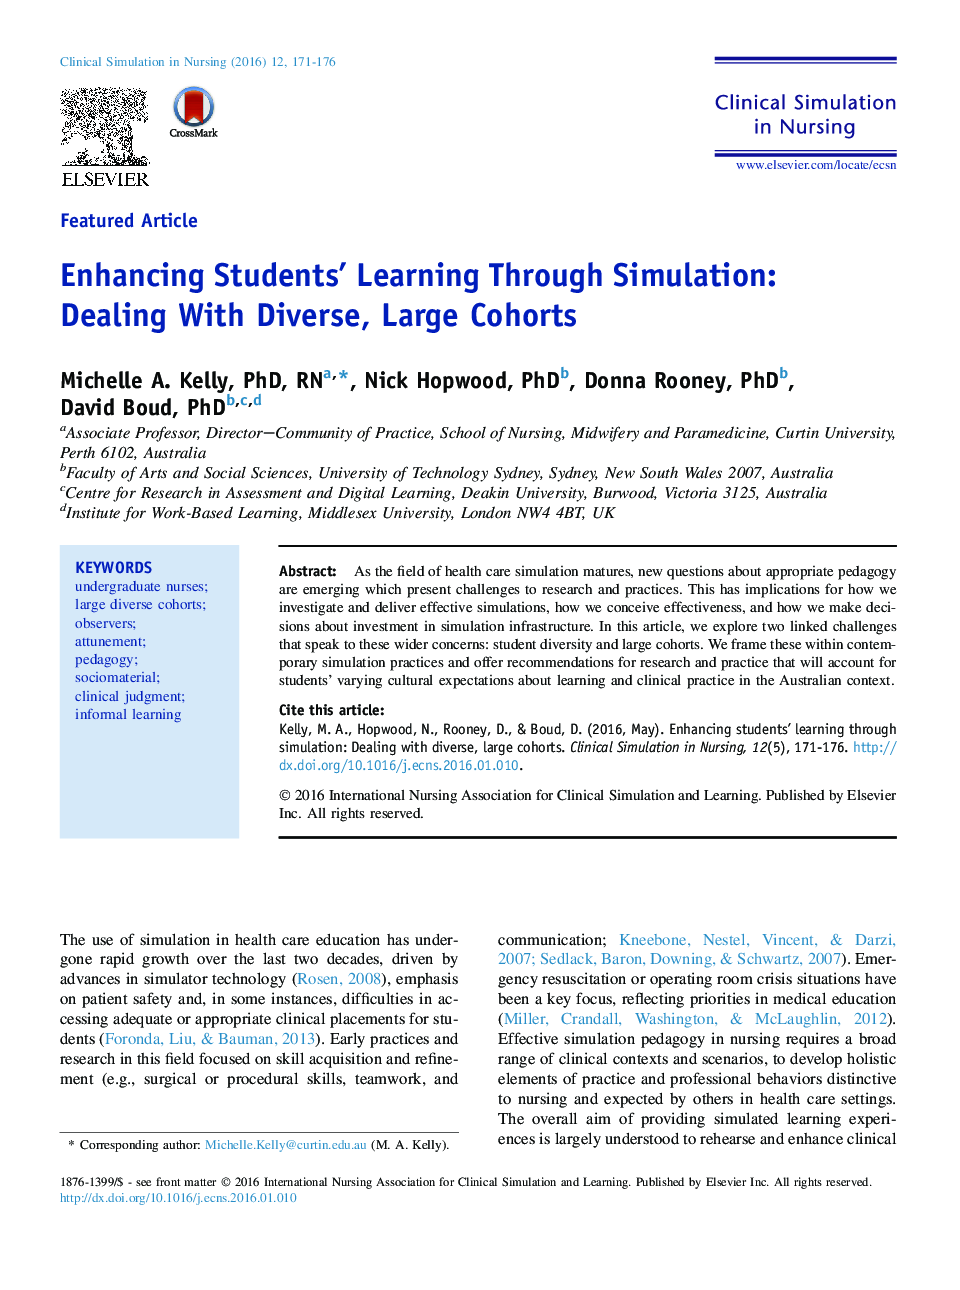 Enhancing Students' Learning Through Simulation: Dealing With Diverse, Large Cohorts